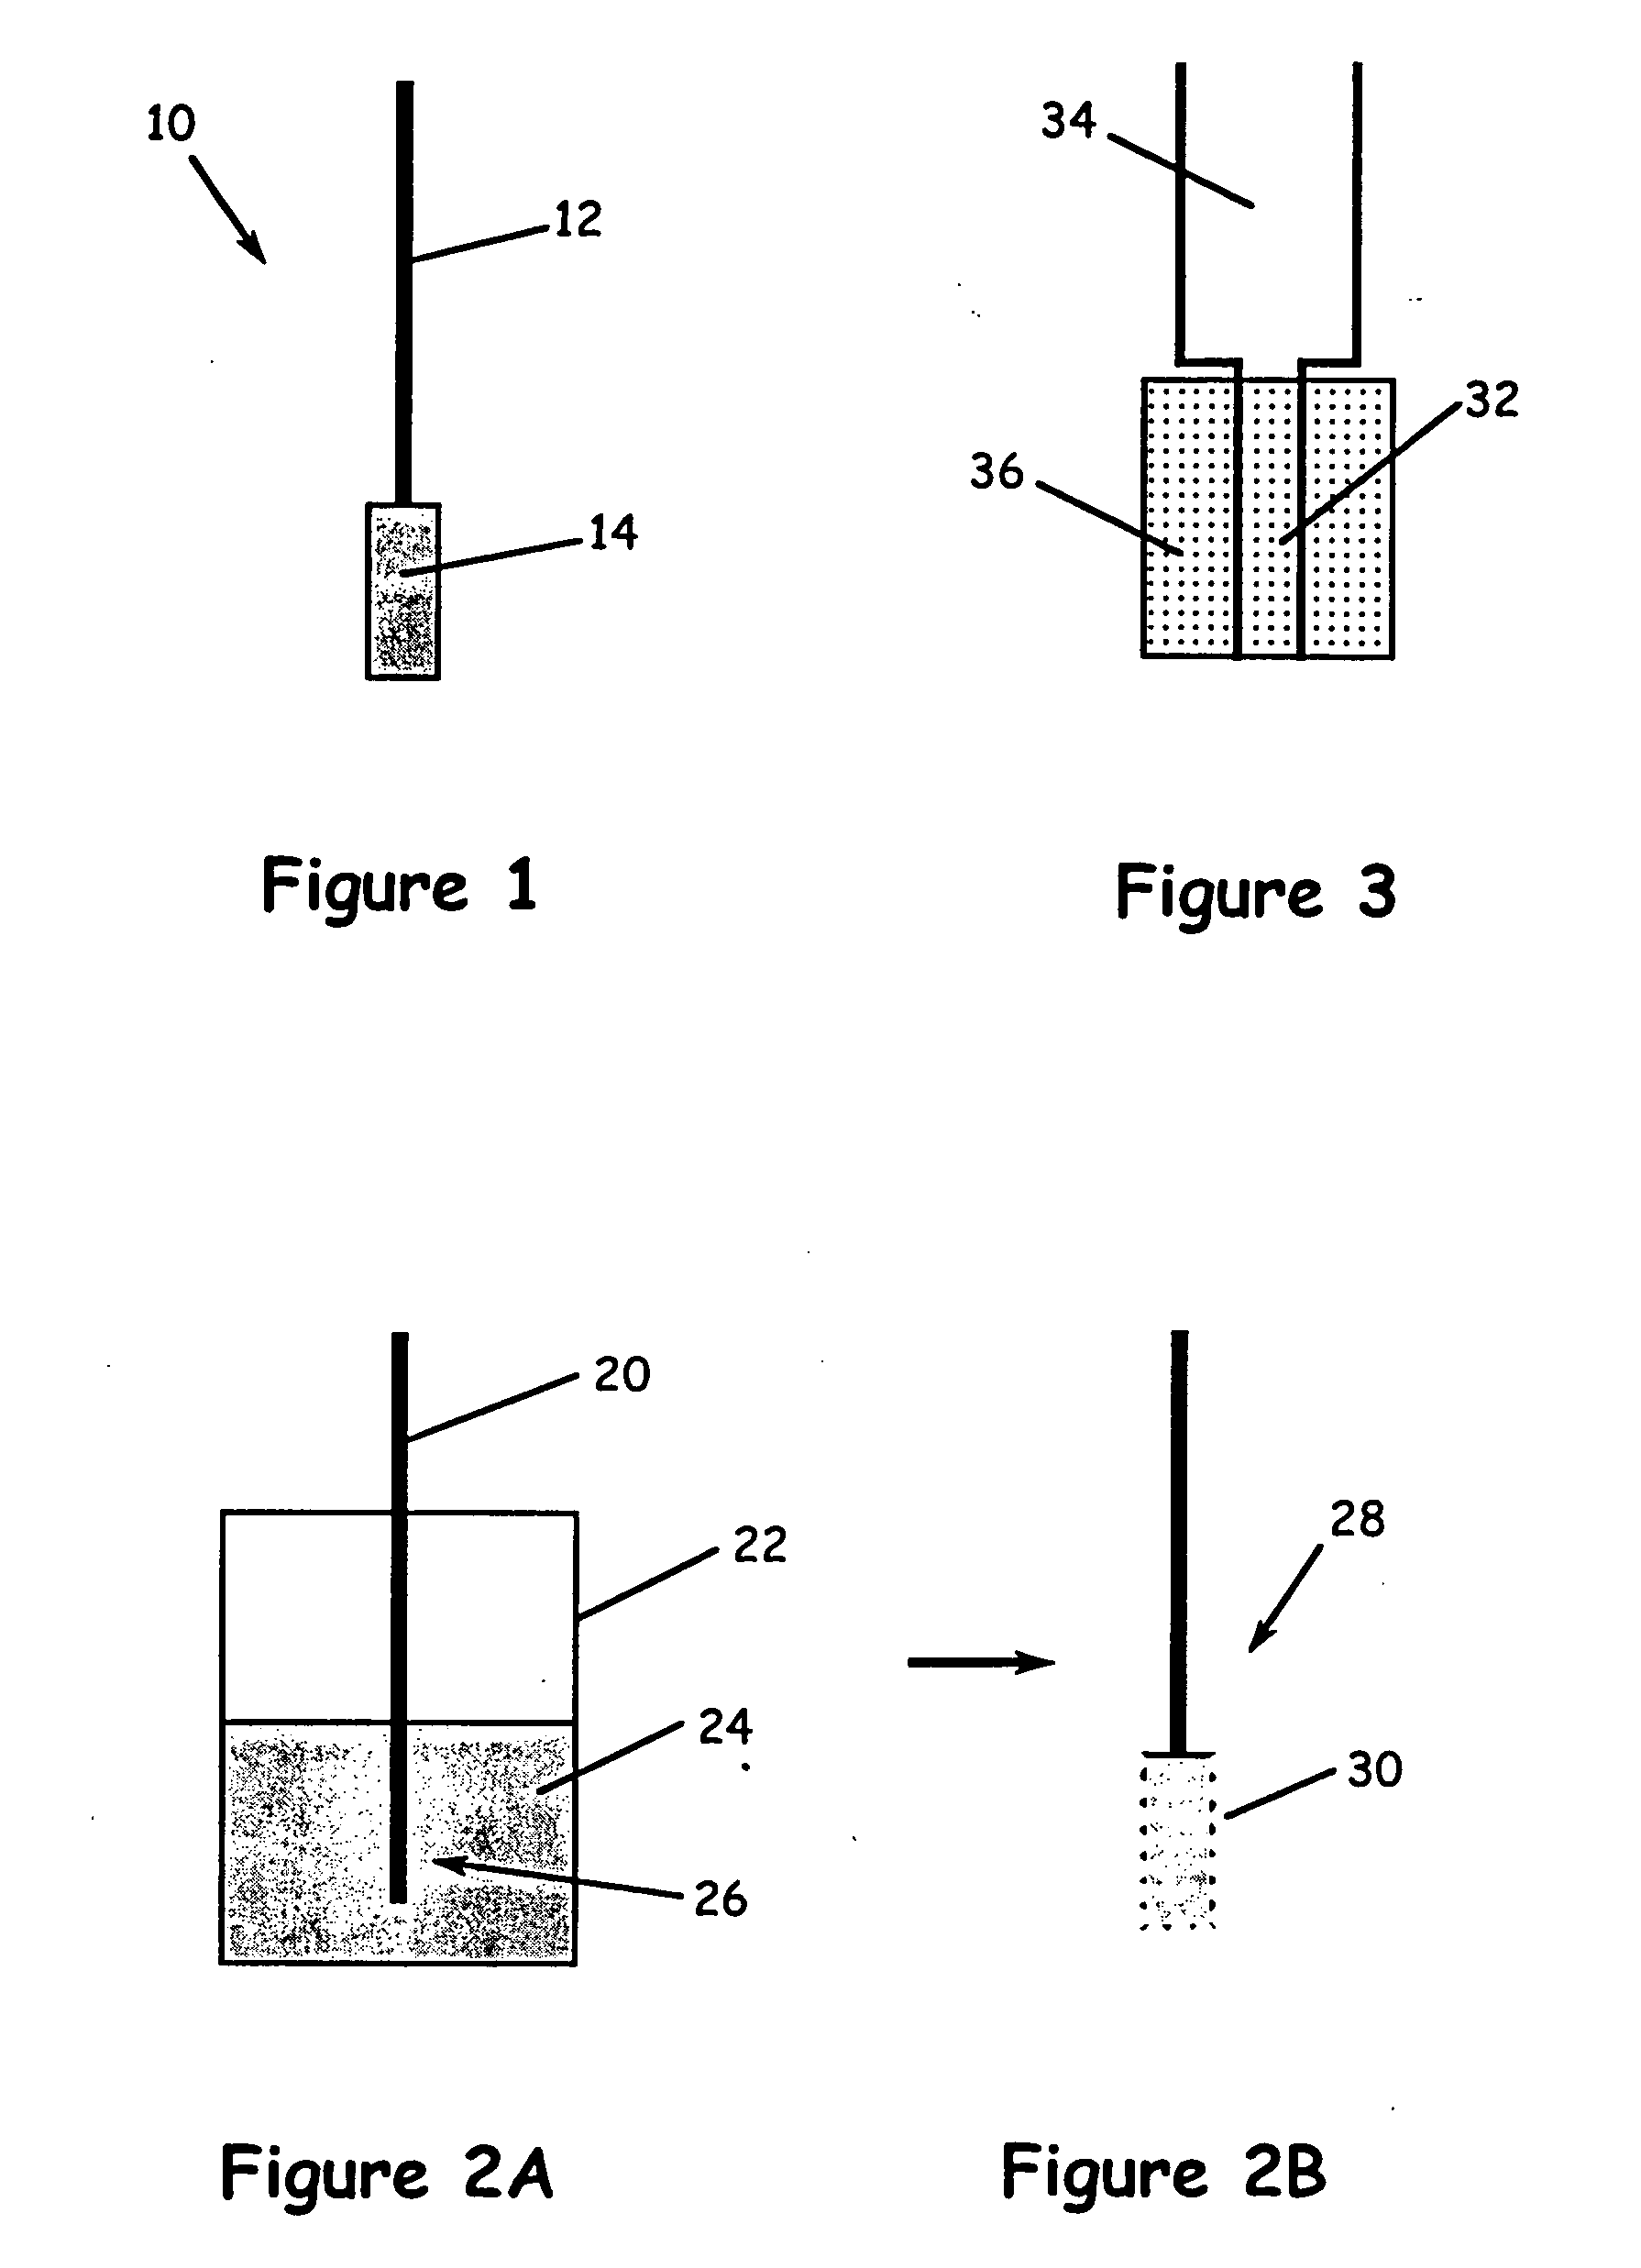 Method for preparing a solid phase microextraction device using aerogel